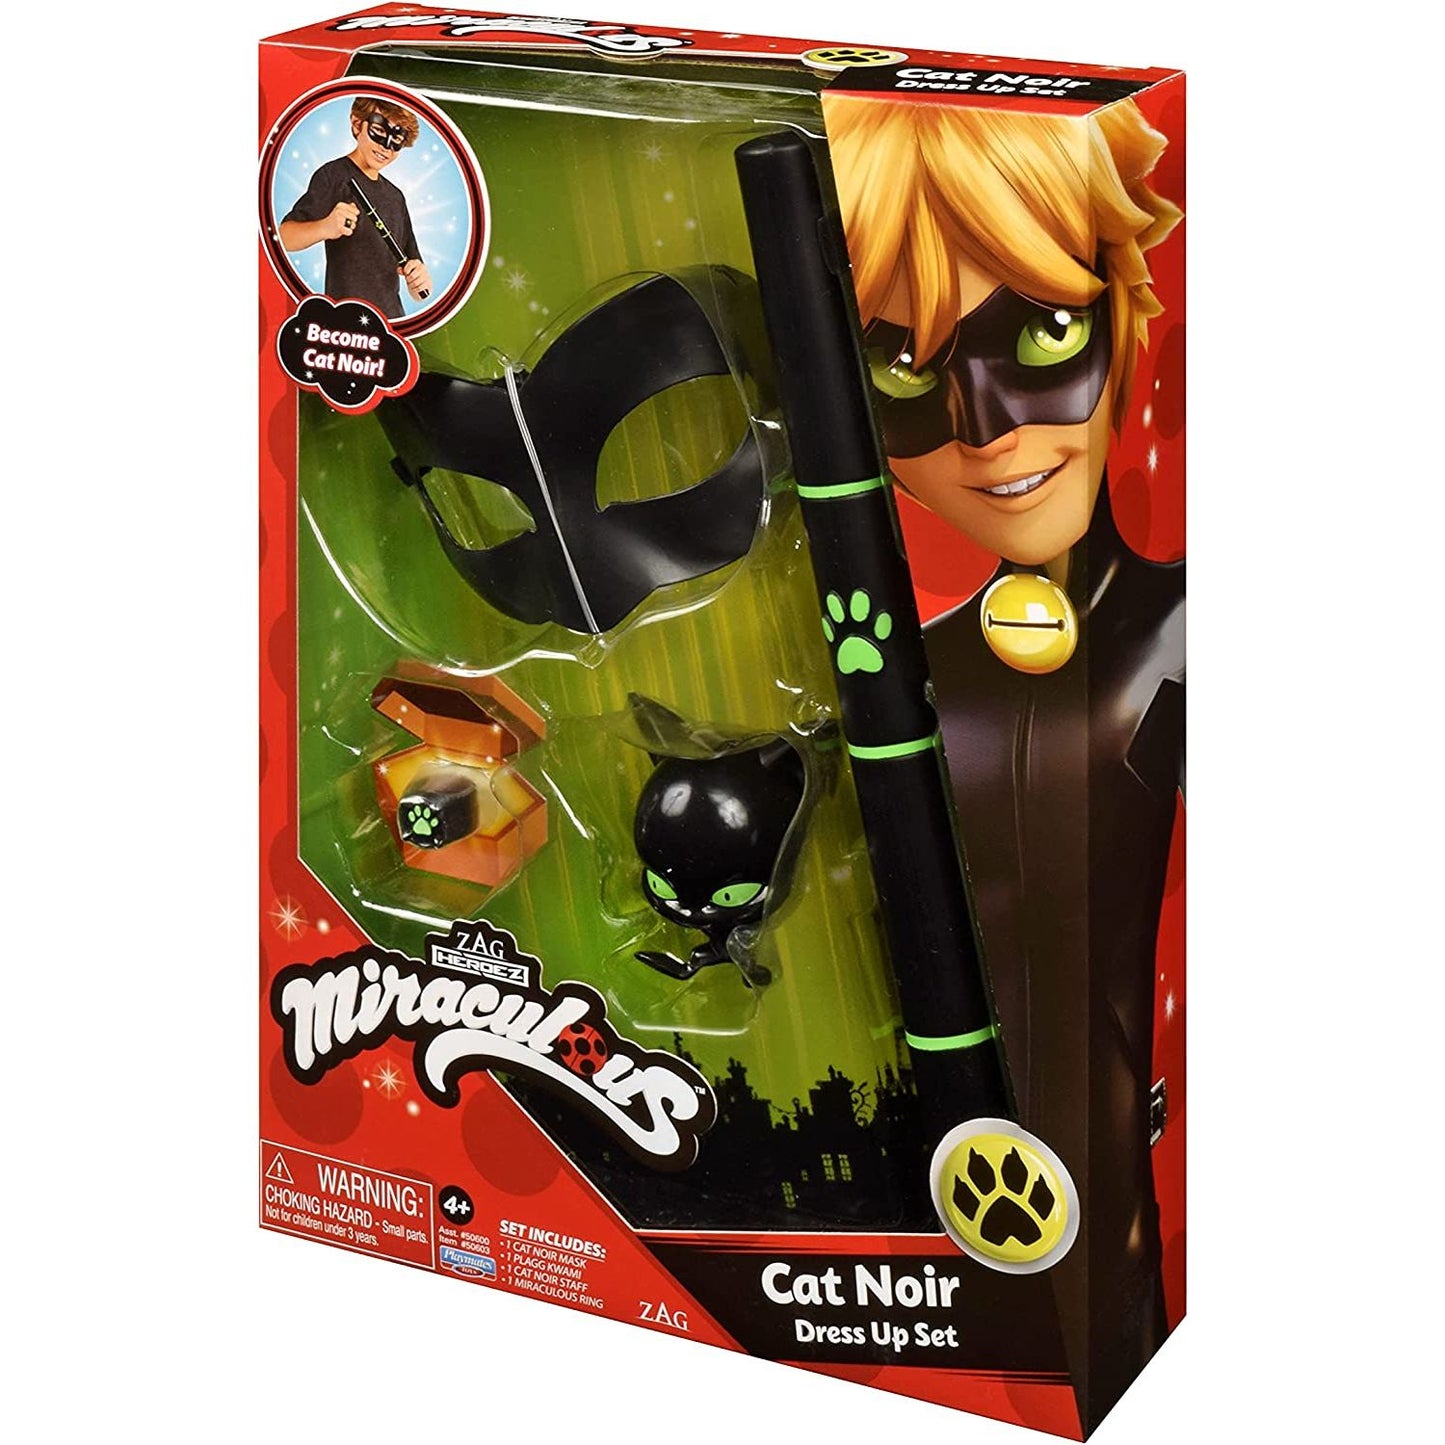 Miraculous Cat Noir Dress Up Set with Staff, kwami, mask and Ring by Playmates Toys